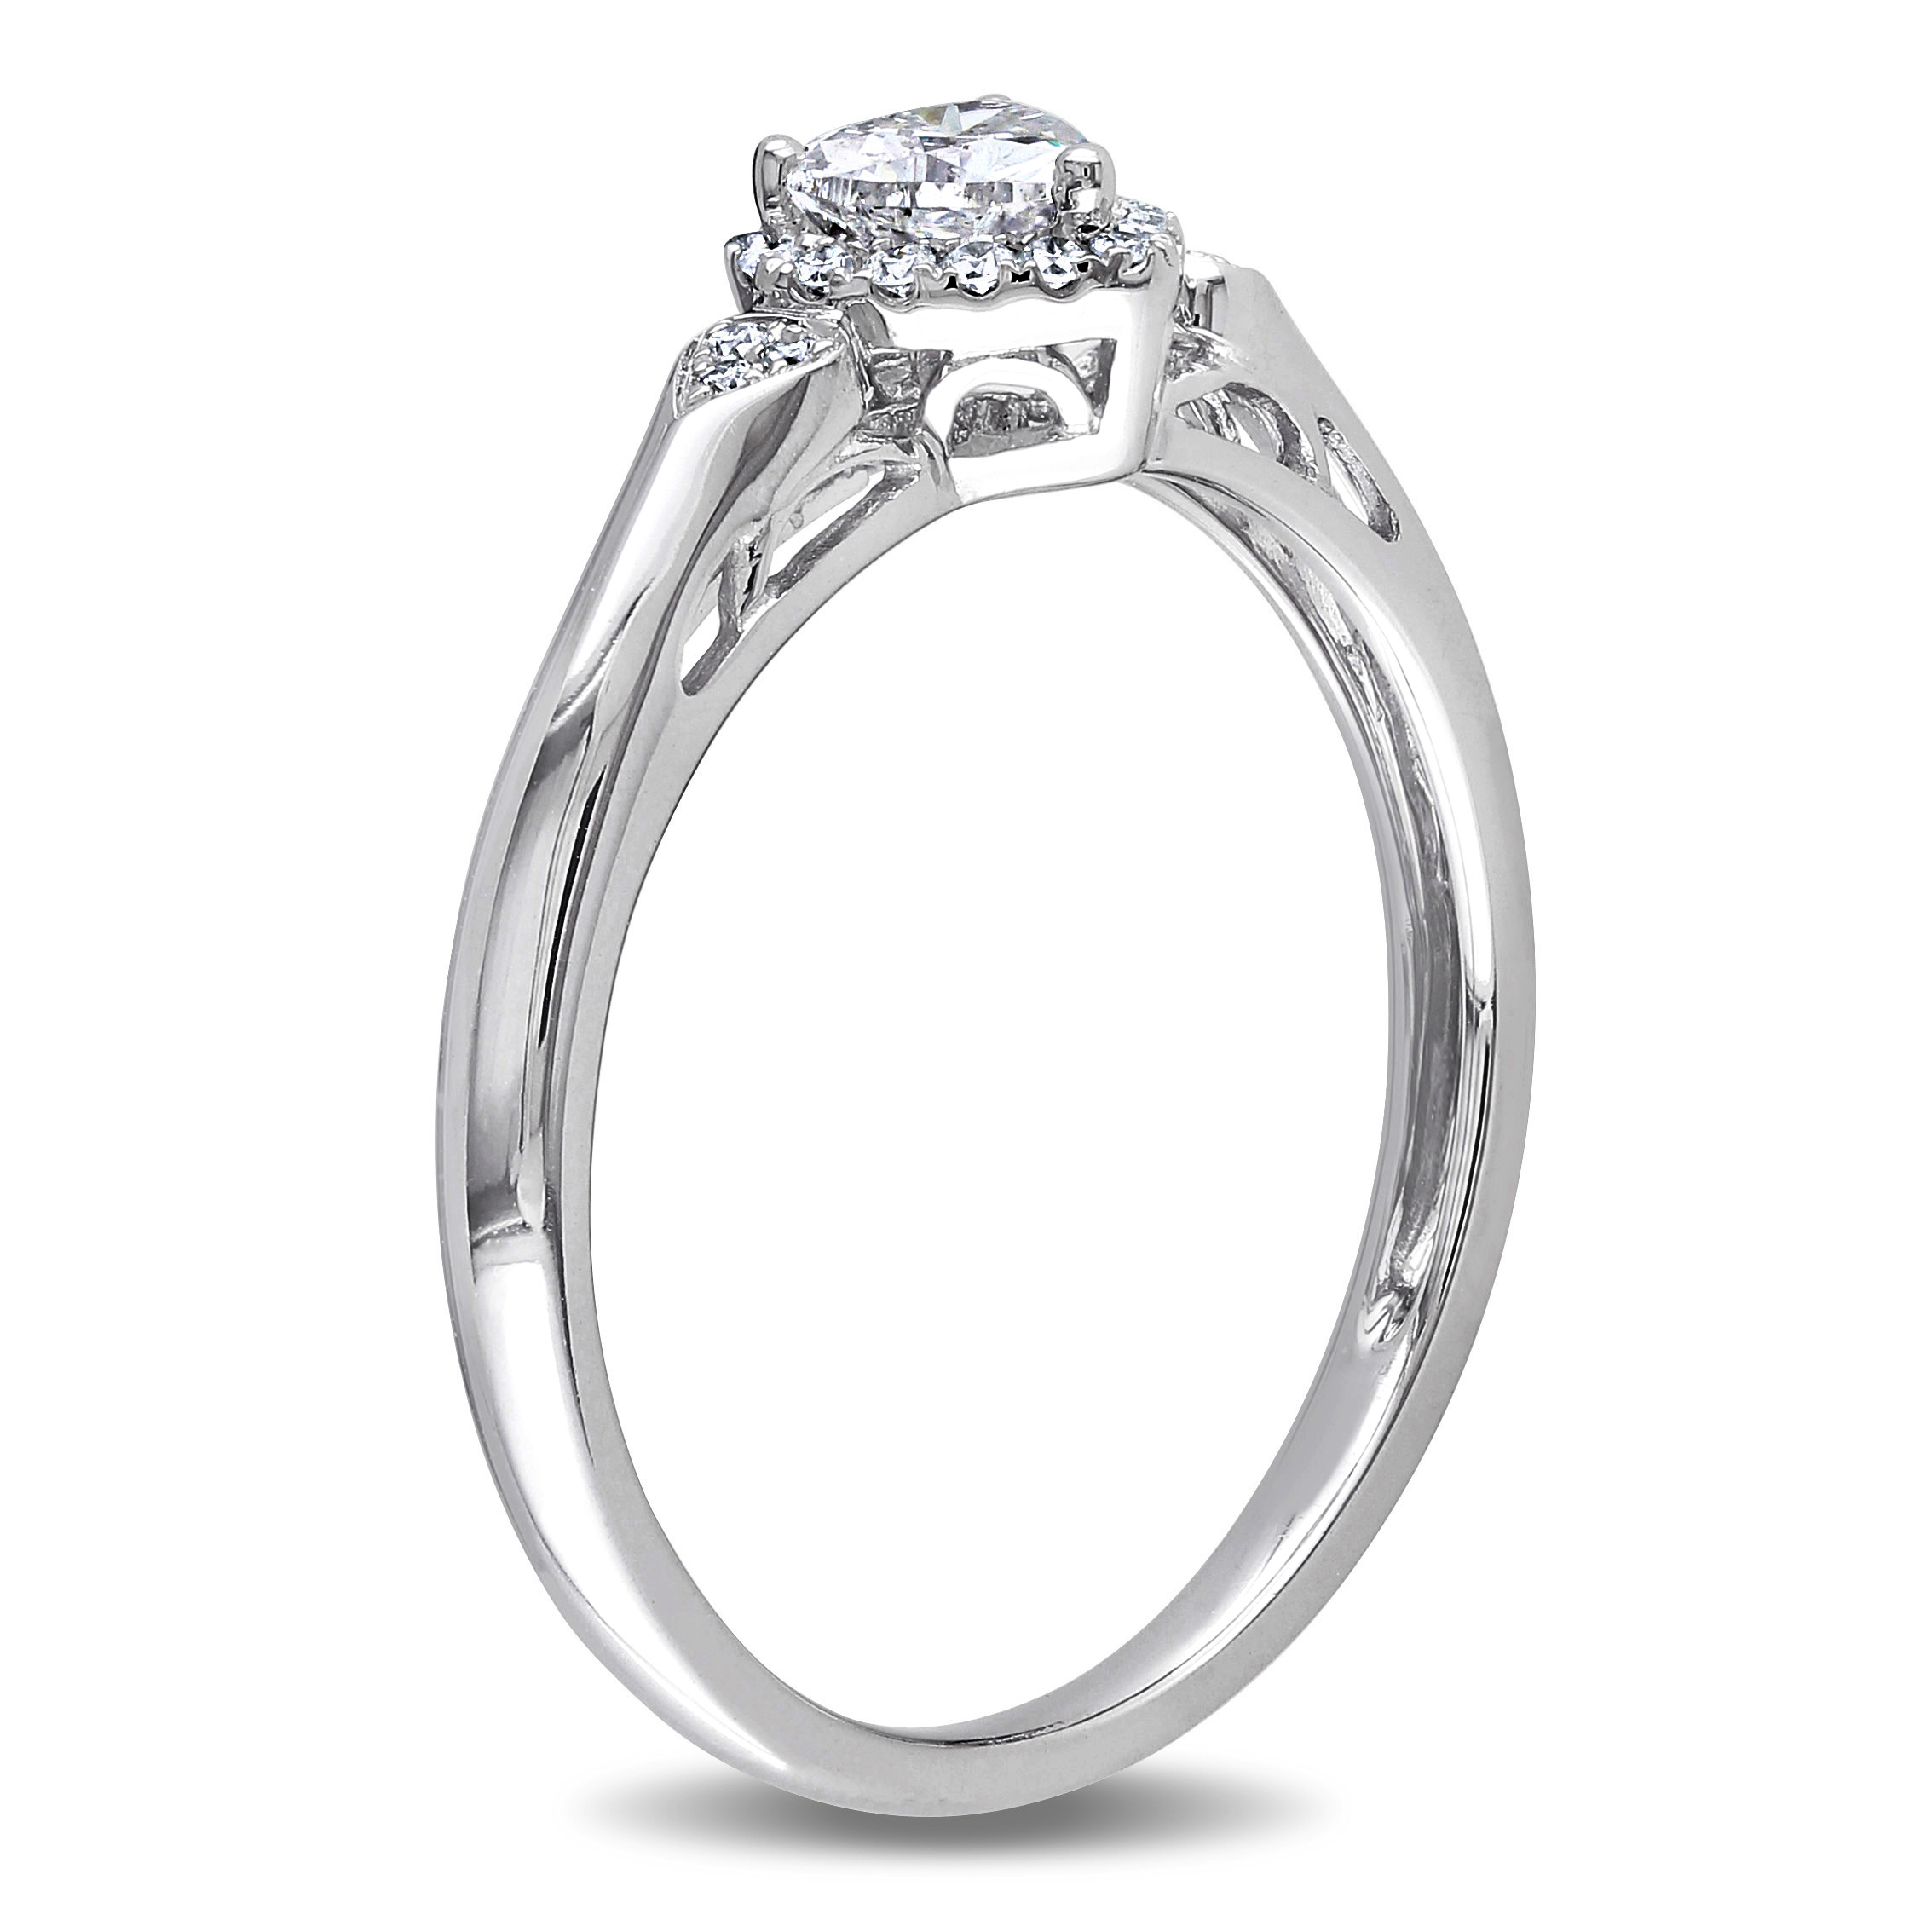 2/5 CT TW Heart-Cut Diamond Halo Engagement Ring in 14k White Gold